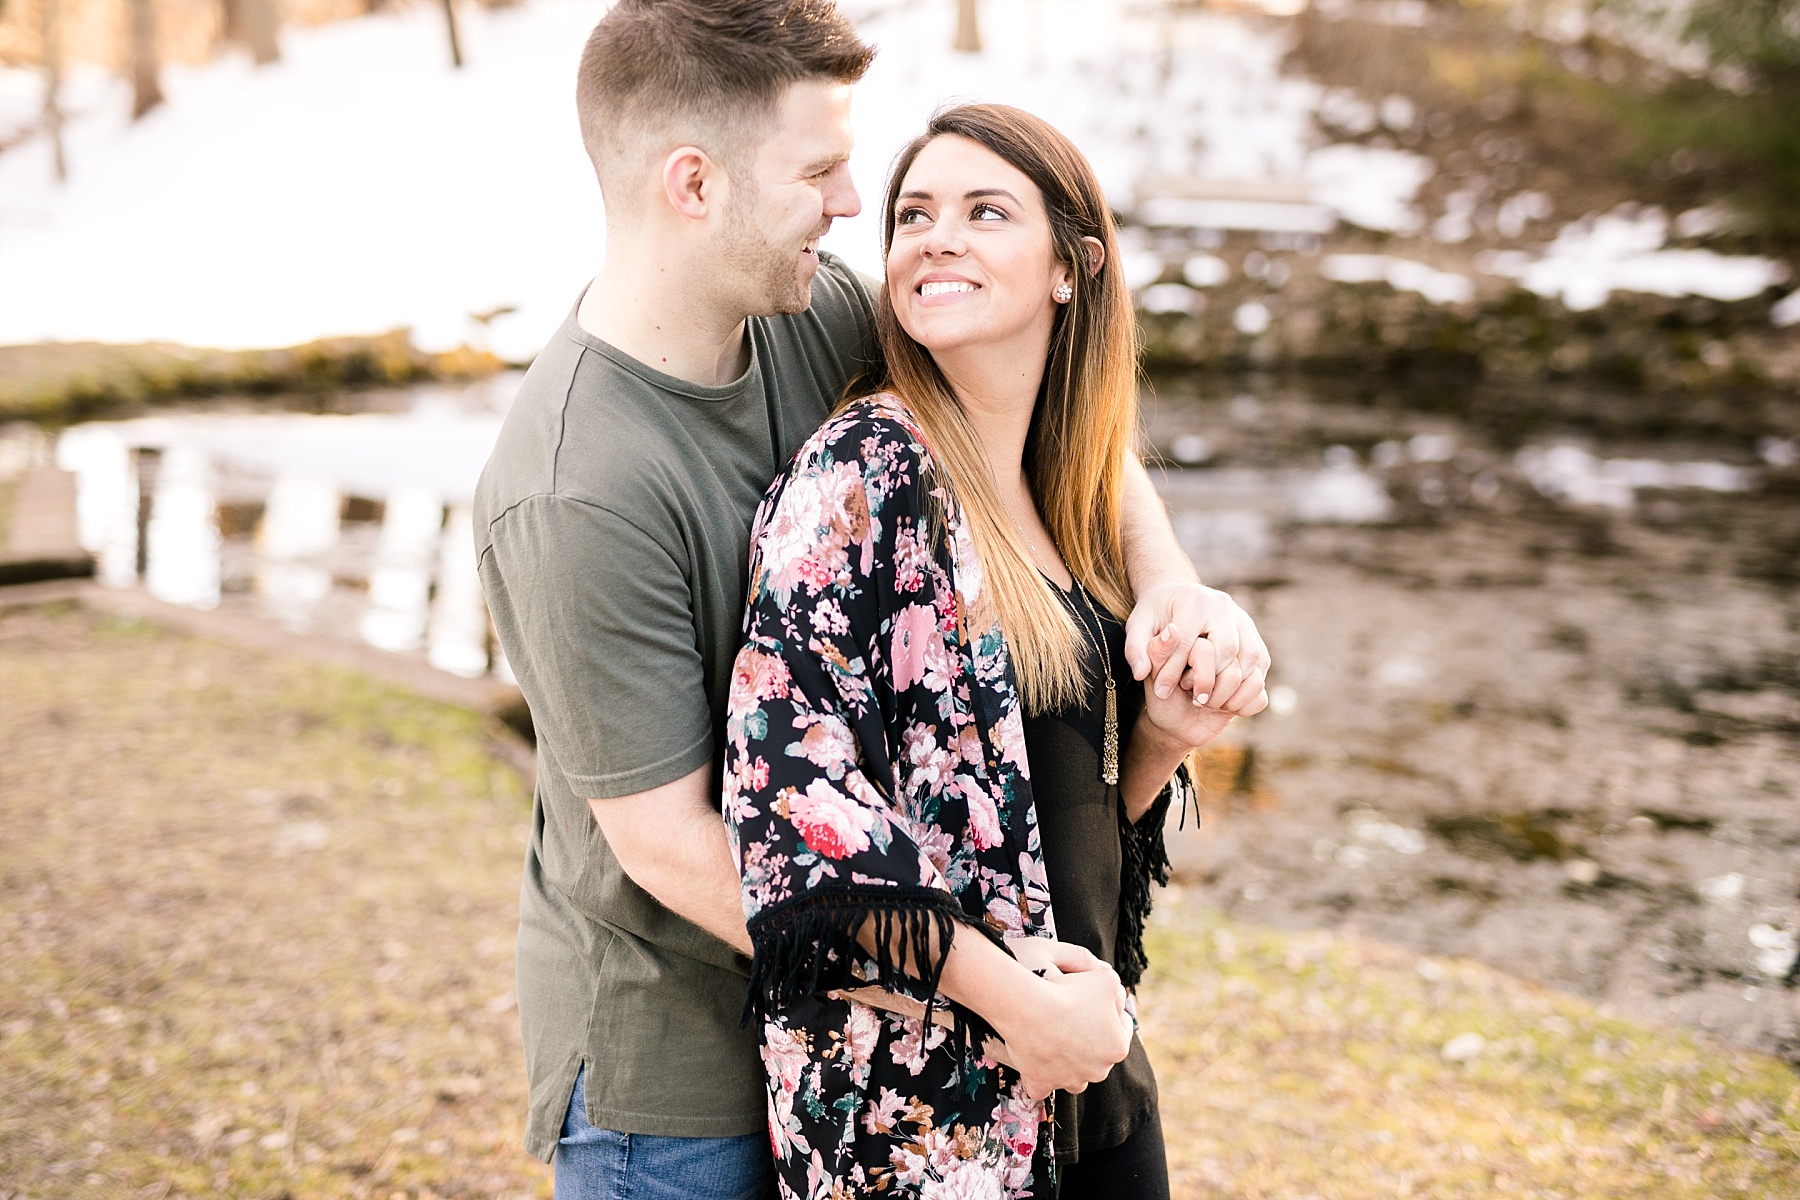 Emily & Blake's sun filled spring outdoor Eau Claire engagement session is sprinkled with snow and spring warmth.